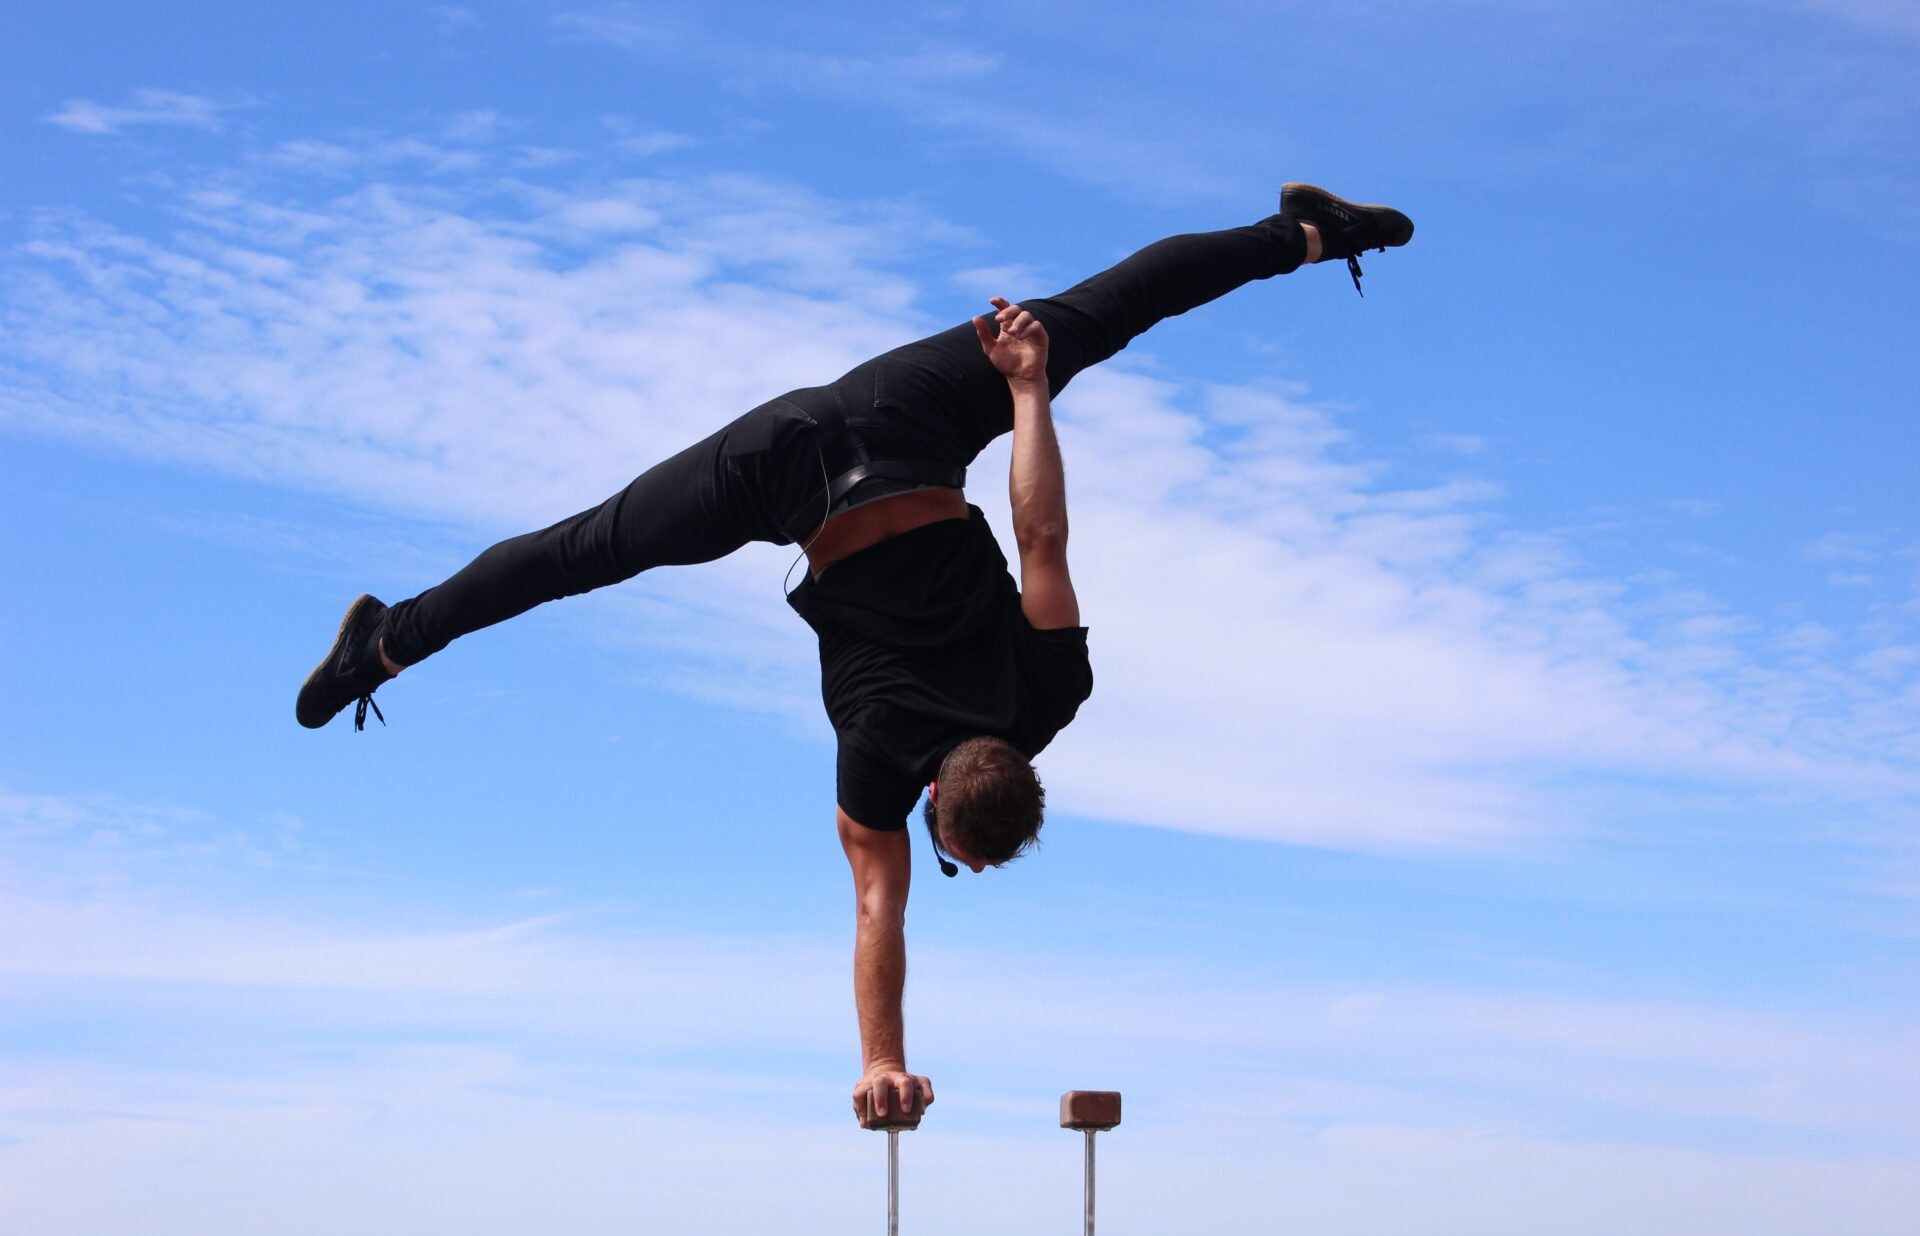 Man balancing upside-down in a one-handed handstand with legs doing the splits (Photo by Ian Flores on Unsplash)